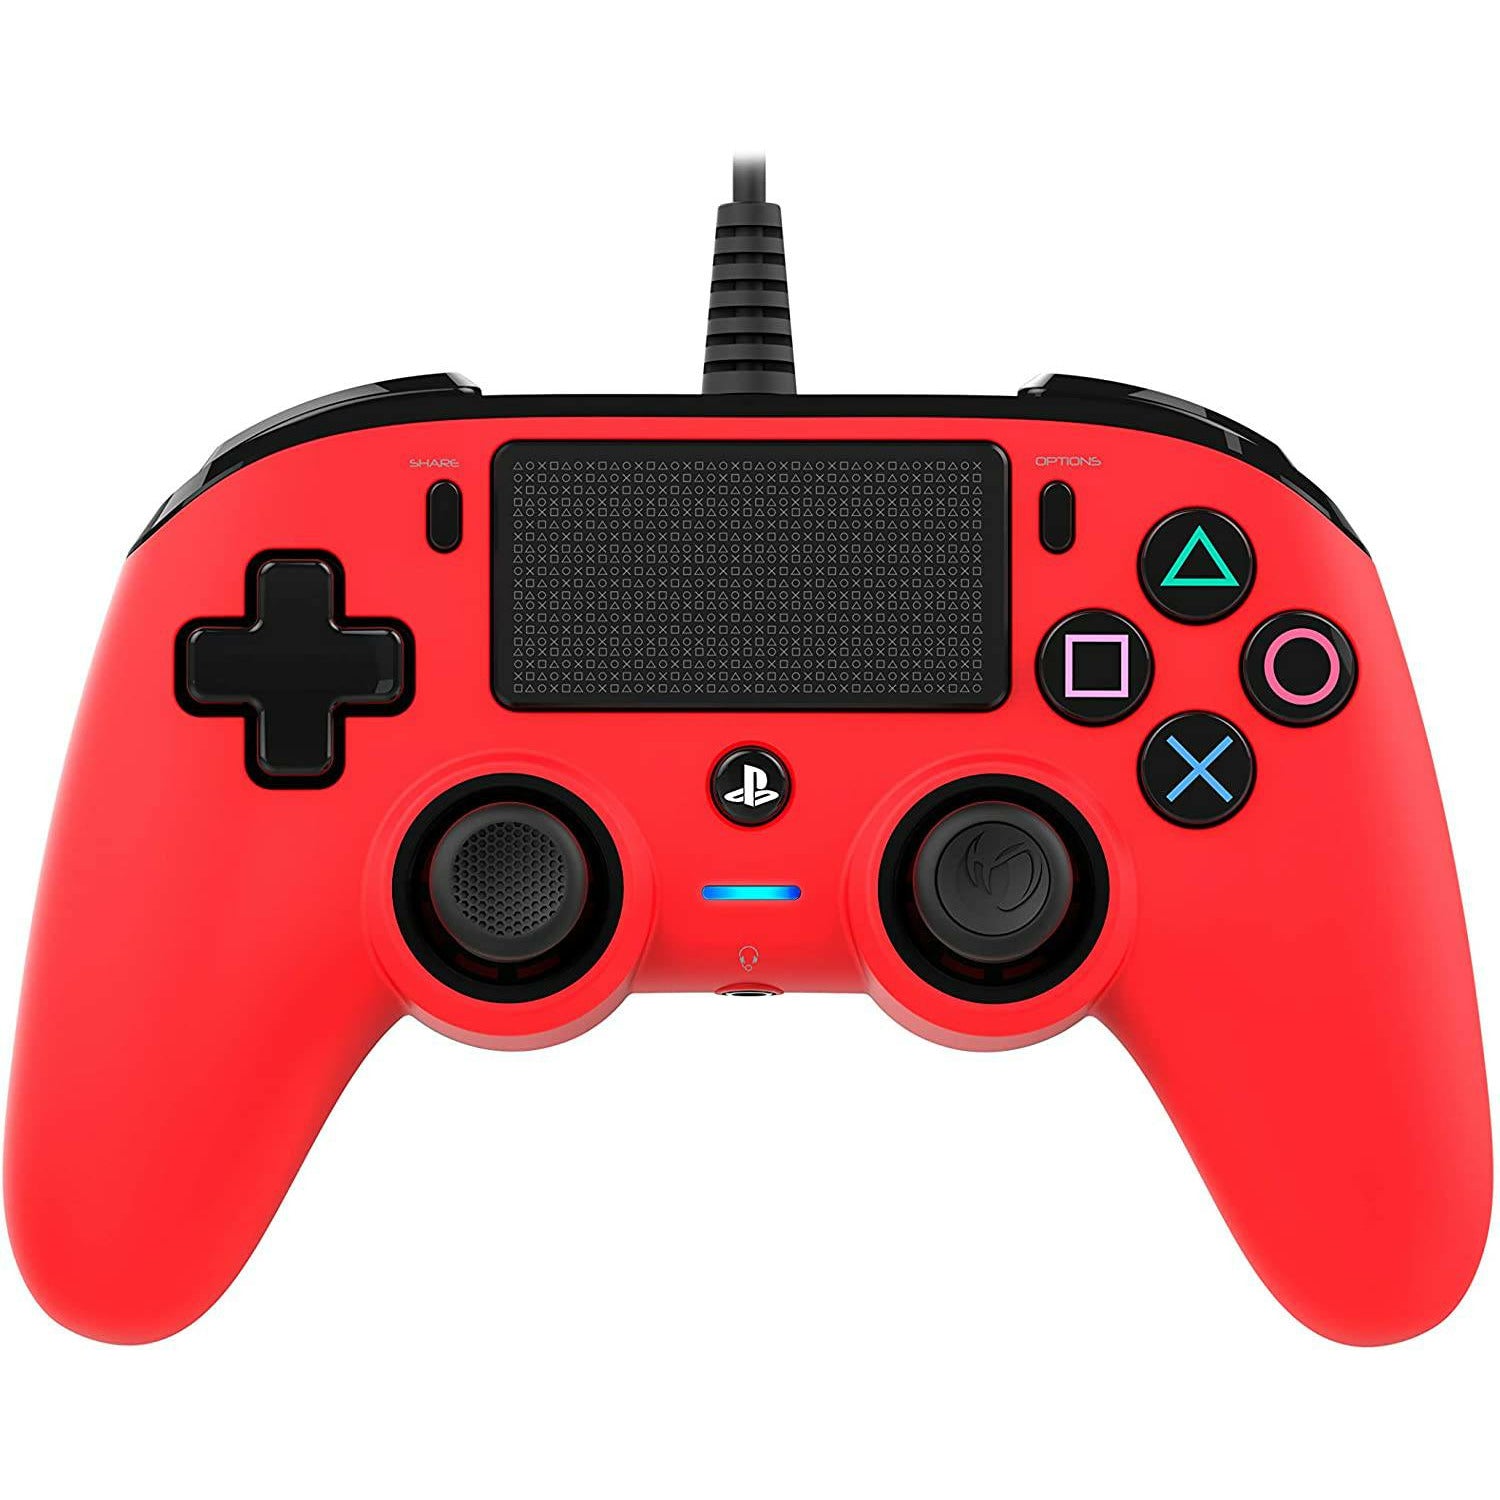 Control Nacon Wired Compact para PS4 - Gshop Pty